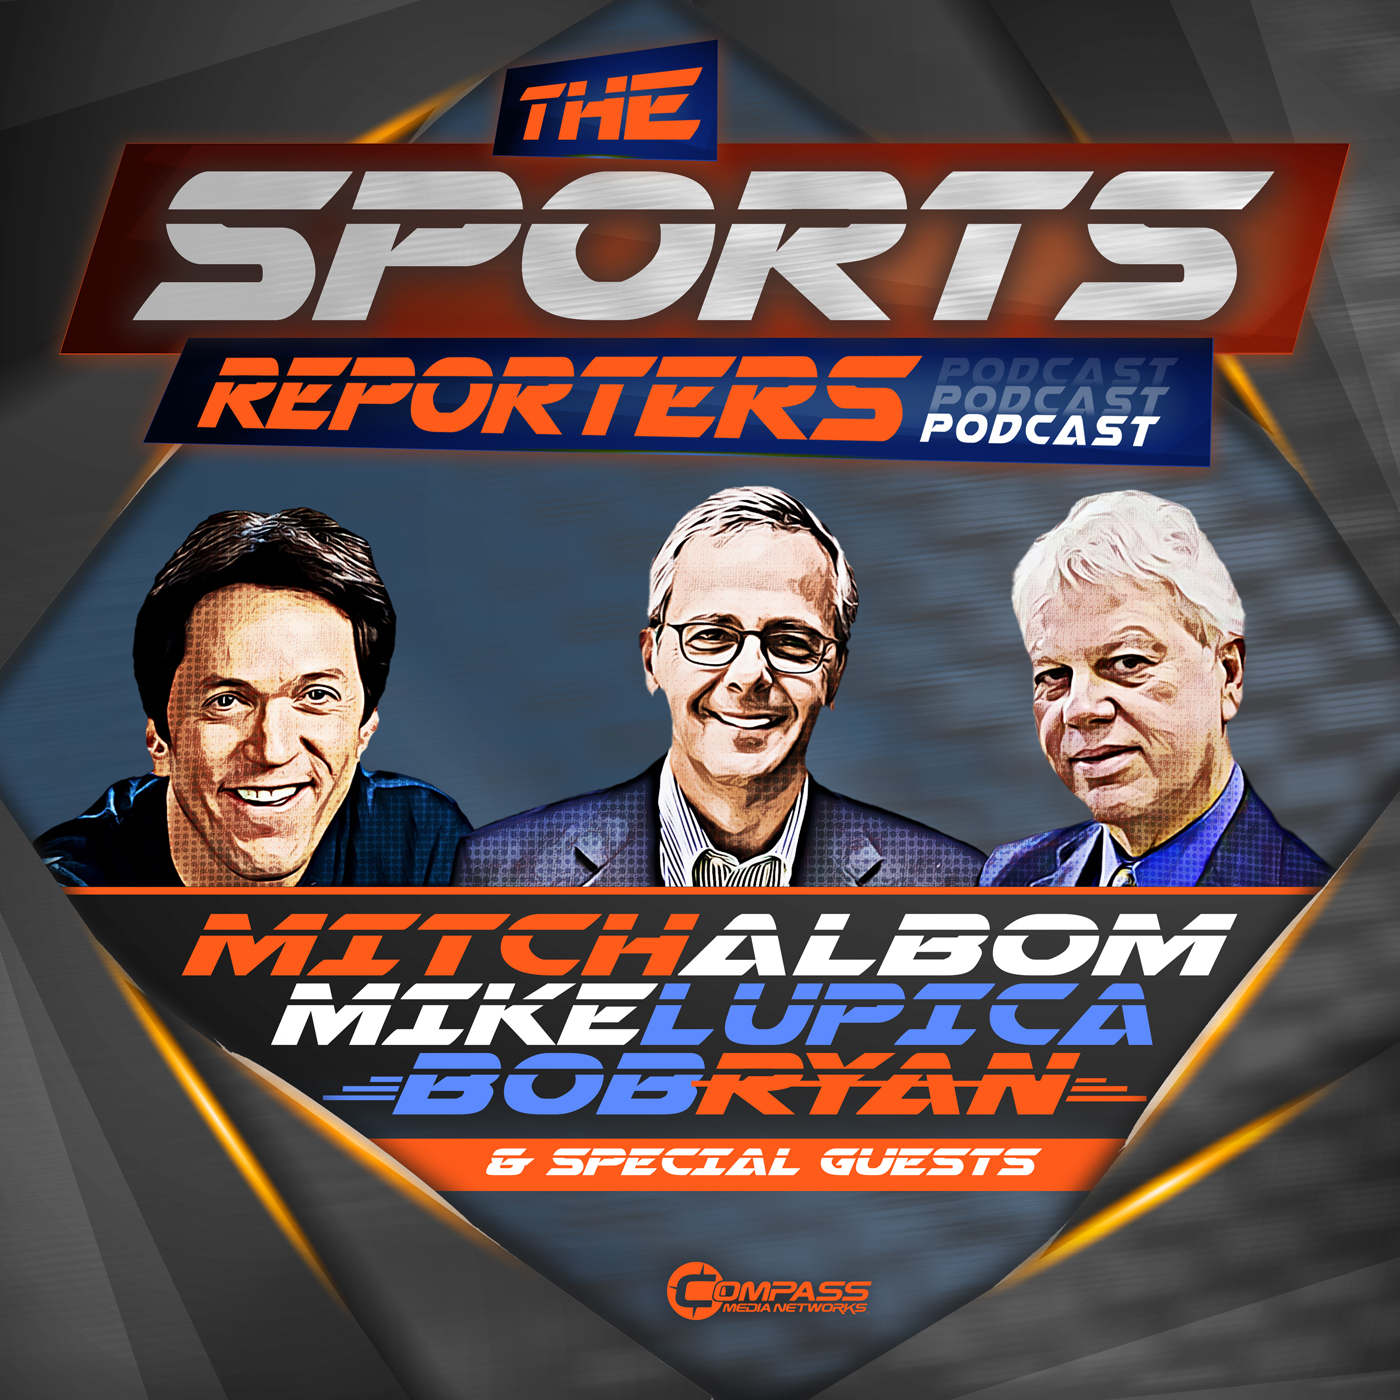 The Sports Reporters - Episode 185 - Can the Raptors close out the NBA Finals? Rafael Nadal's place in tennis history. And Game 7 in NHL finals.